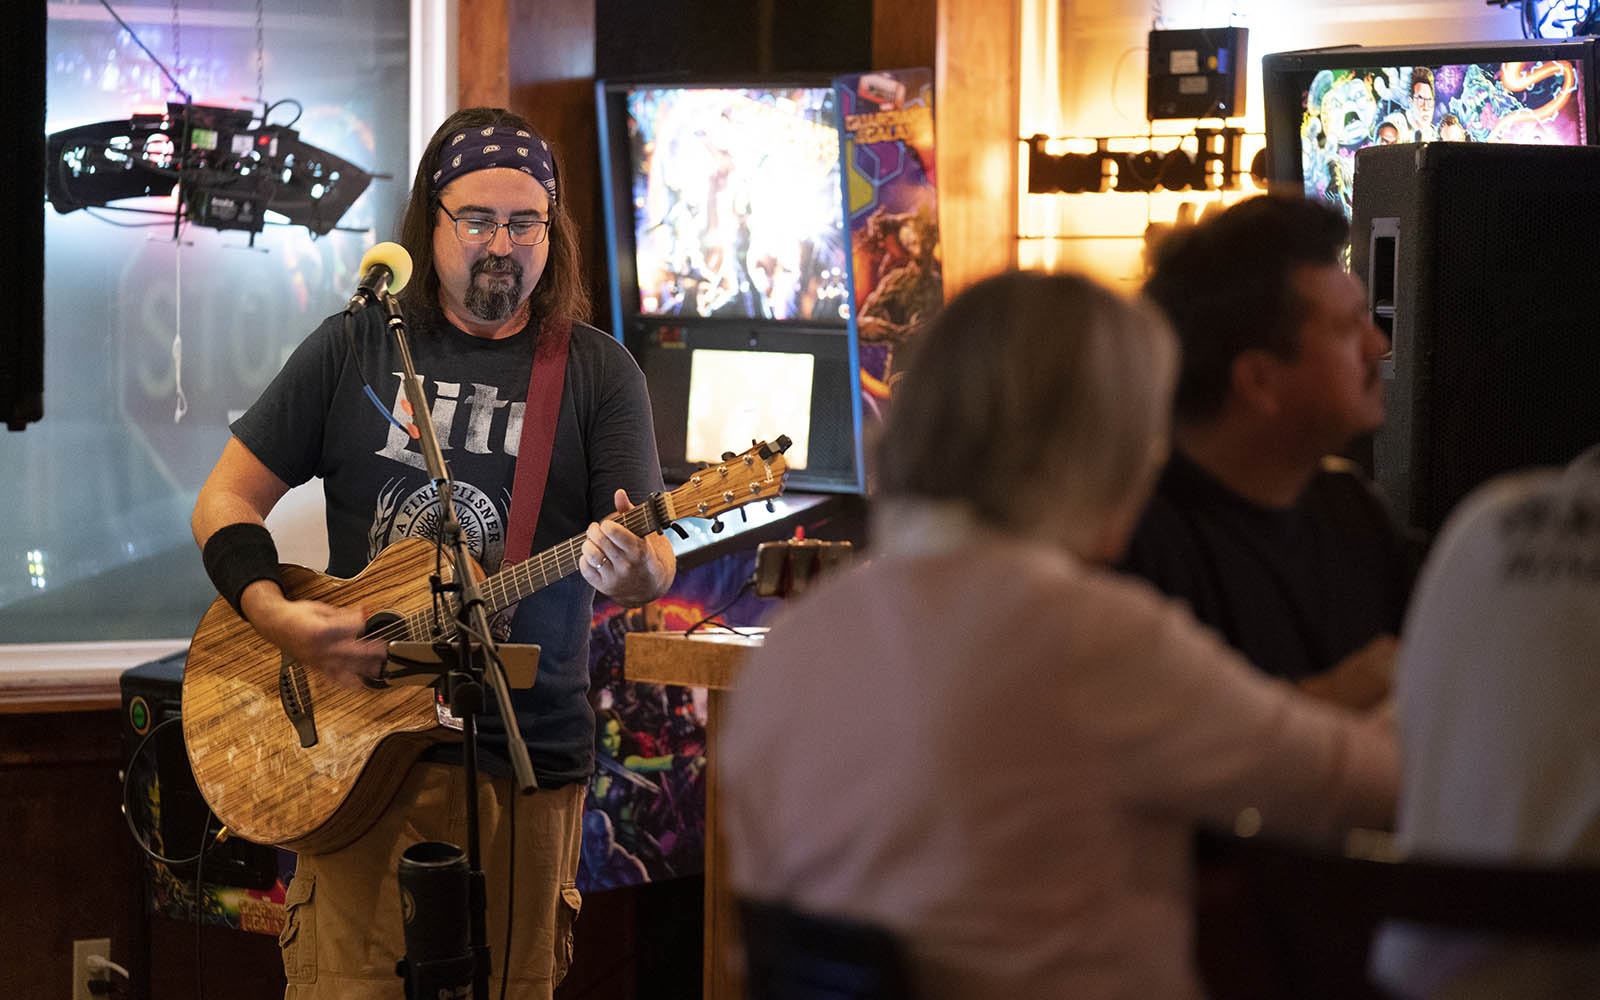 A white man with a goatee, glasses, and a bandana over his long hair plays an acoustic guitar standing in front of the glass window of a bar front with patrons gathered in the foreground.